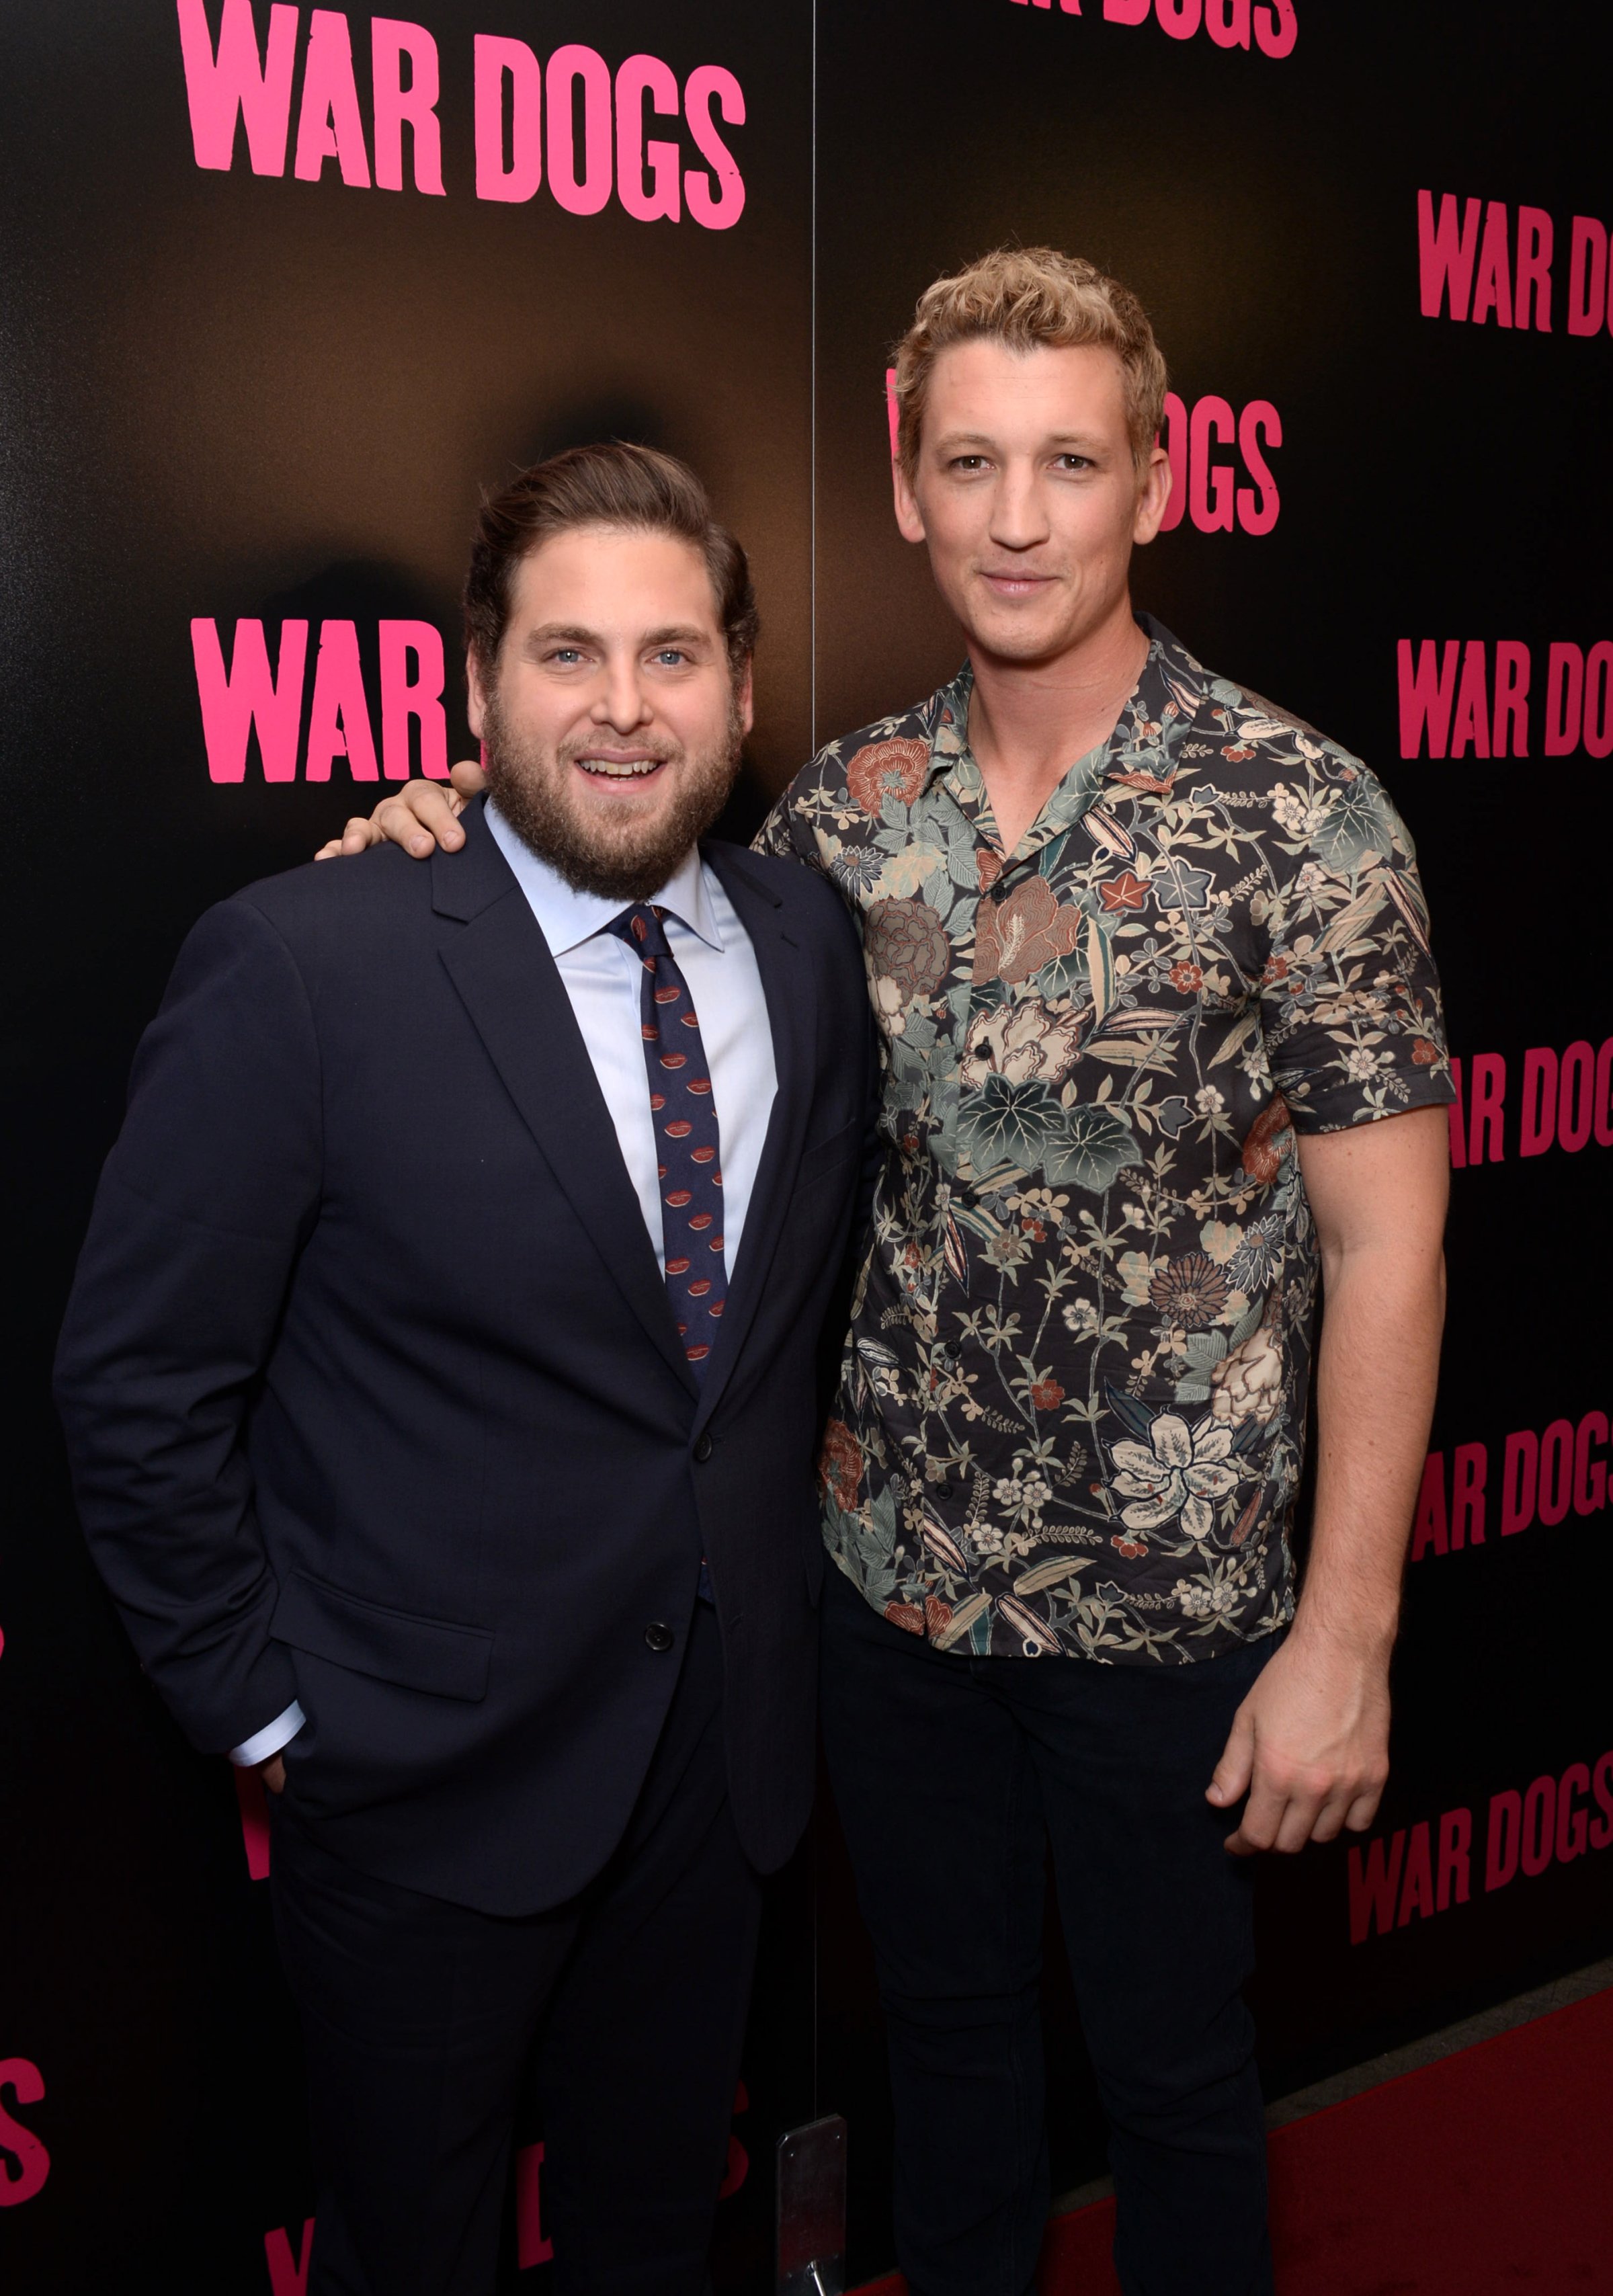 Jonah Hill and Miles Teller attend the "War Dogs" New York premiere on August 3, 2016.